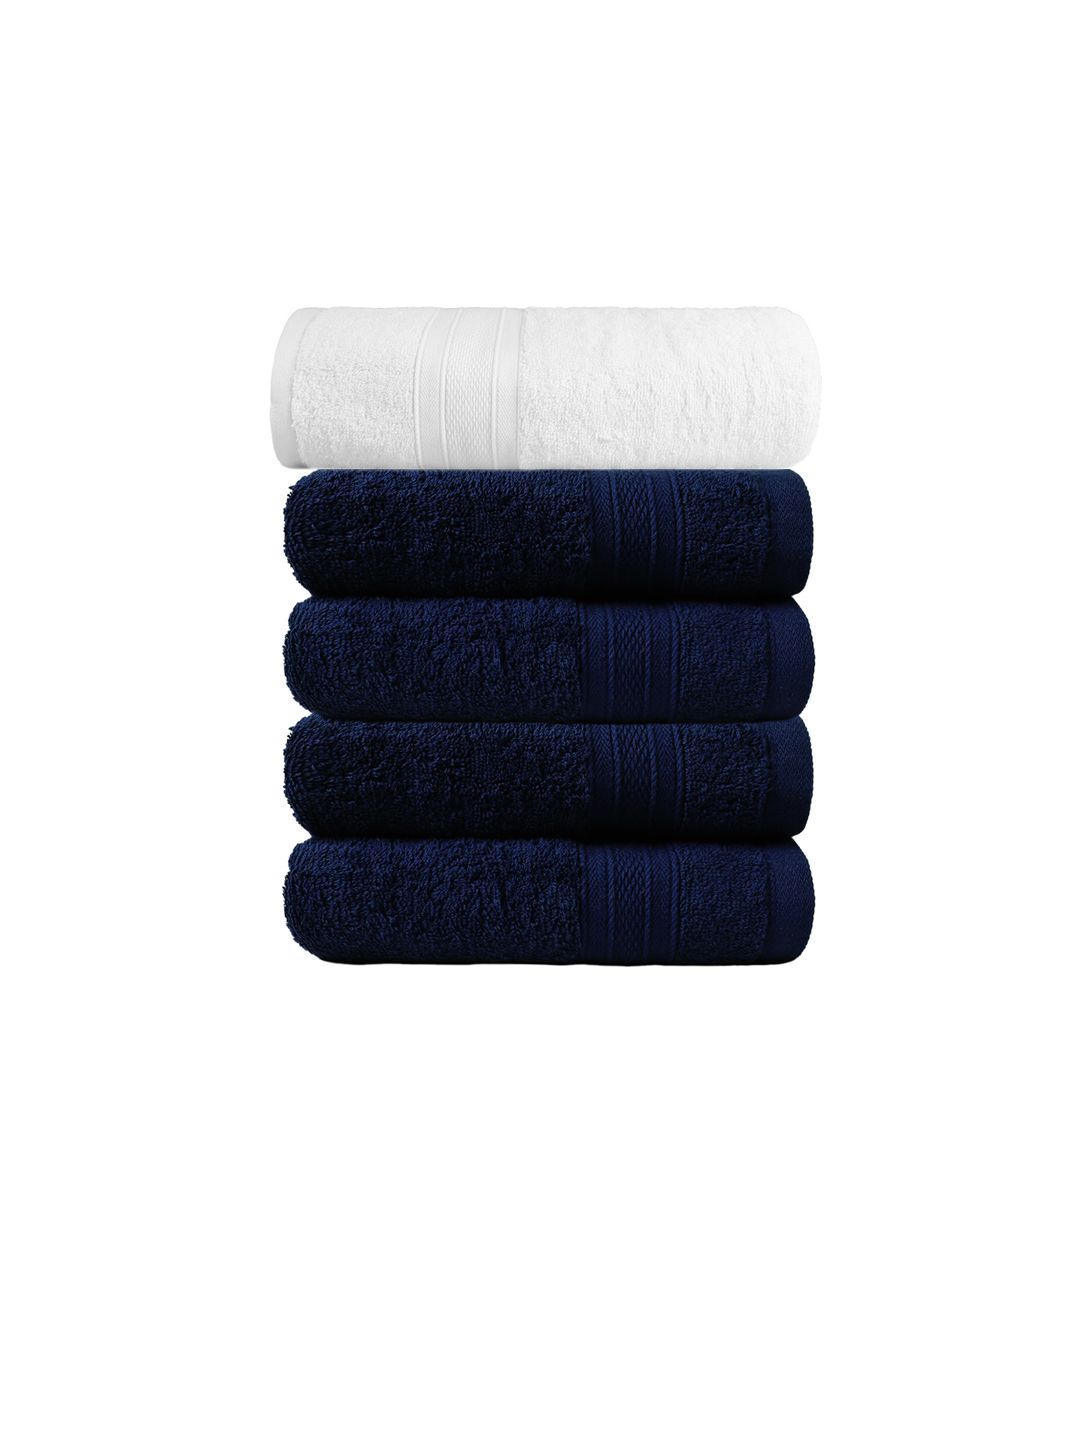 Trident White Solid 500 GSM Cotton Soft & Plush Bath Towel & Set of 4 Hand Towels Price in India